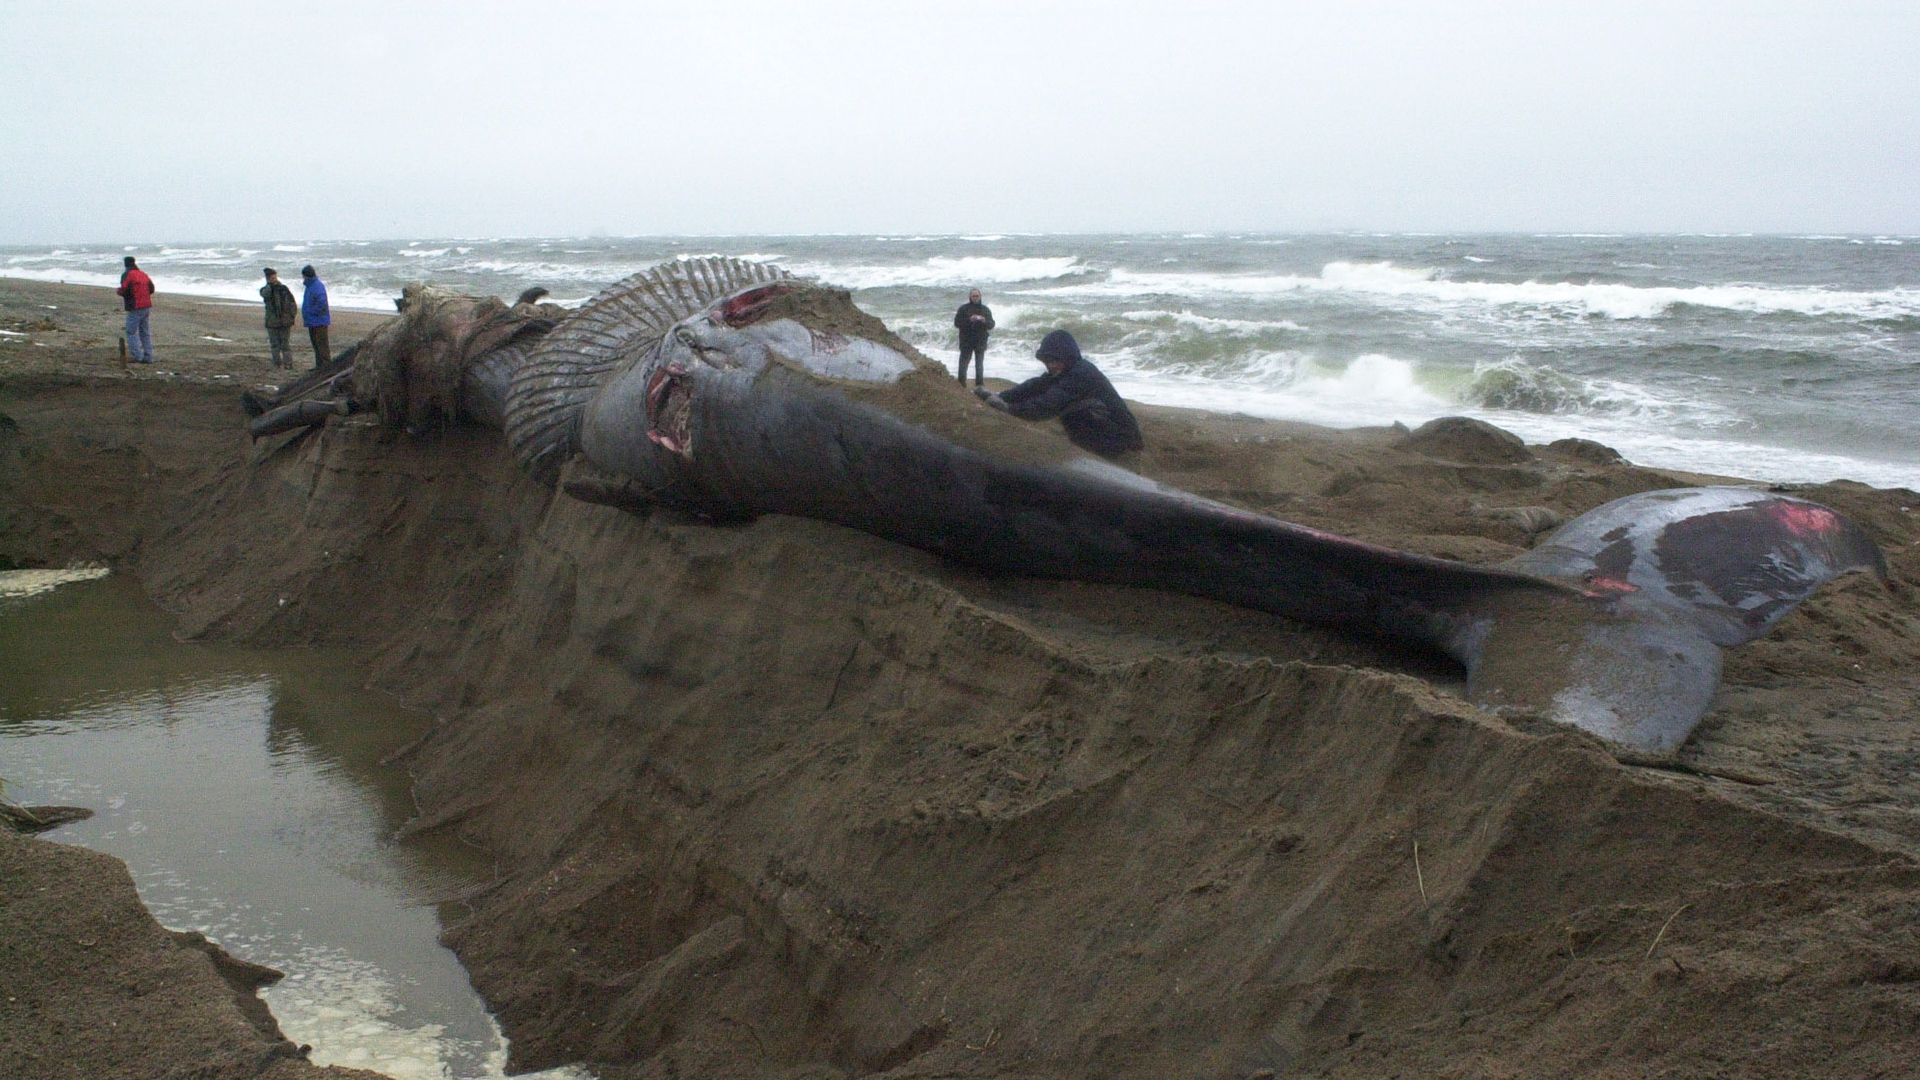 The whale lies at the edge of a huge pit that has been excavated in the sand.